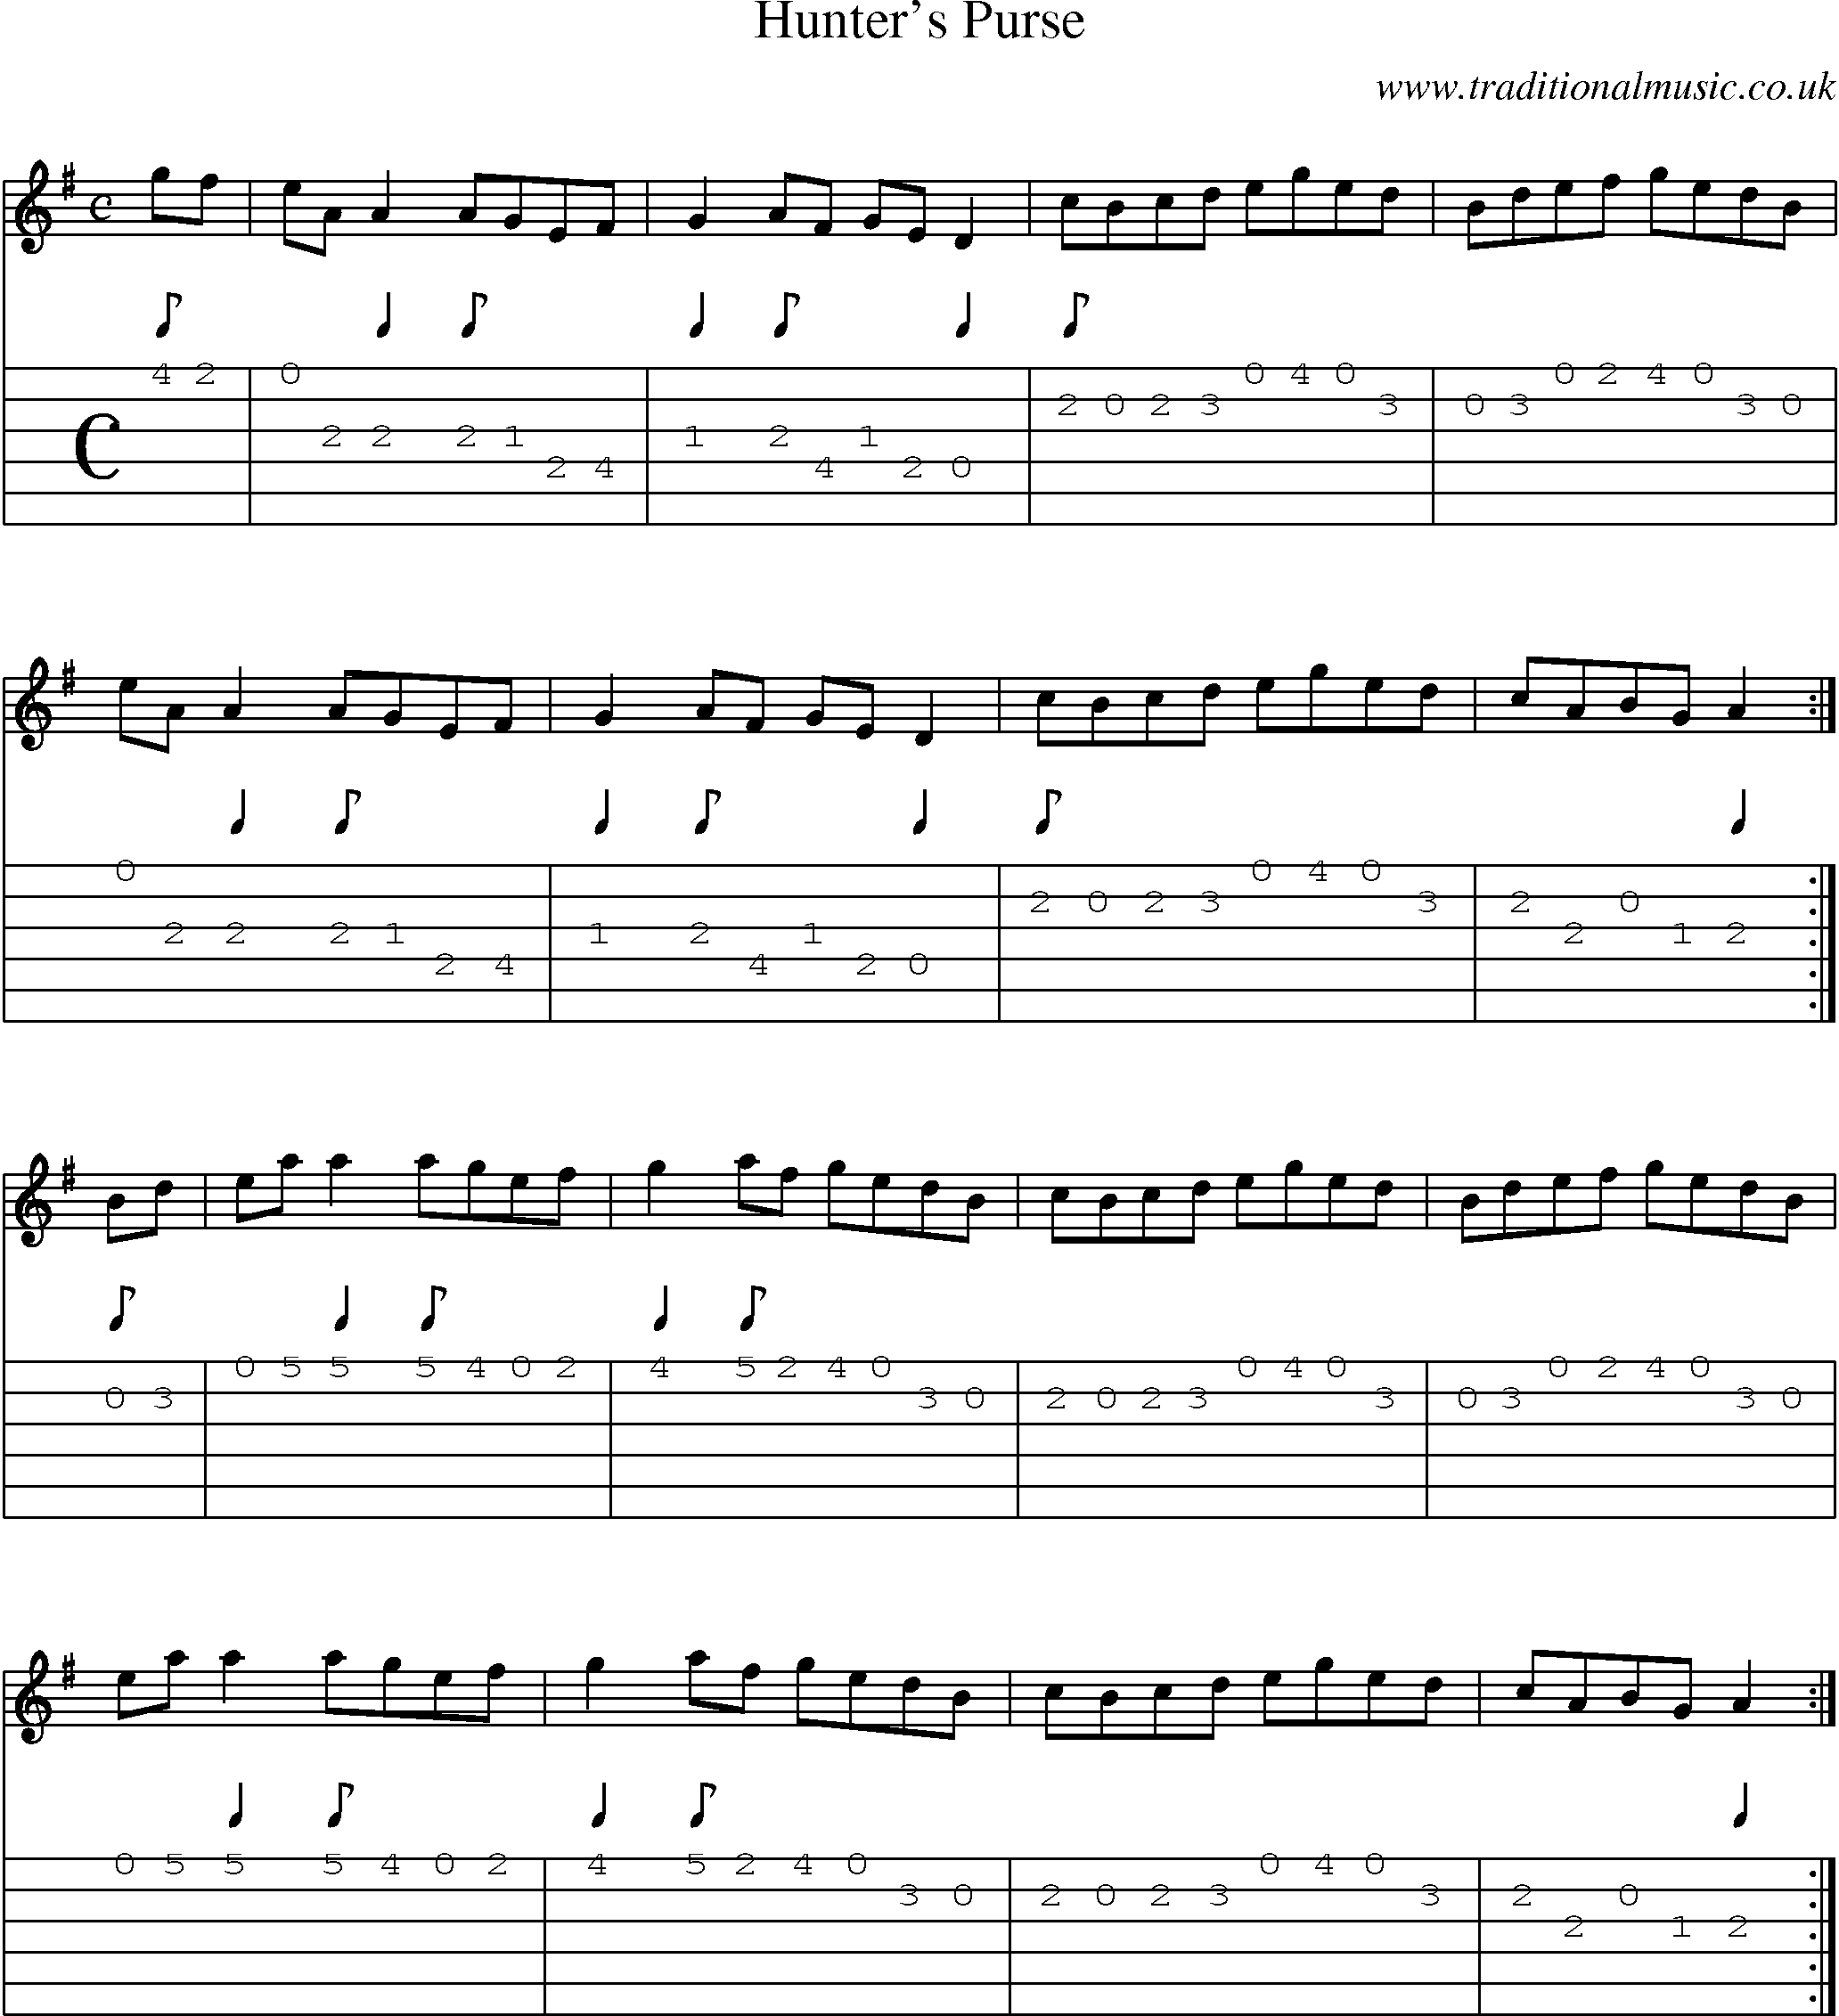 Music Score and Guitar Tabs for Hunters Purse